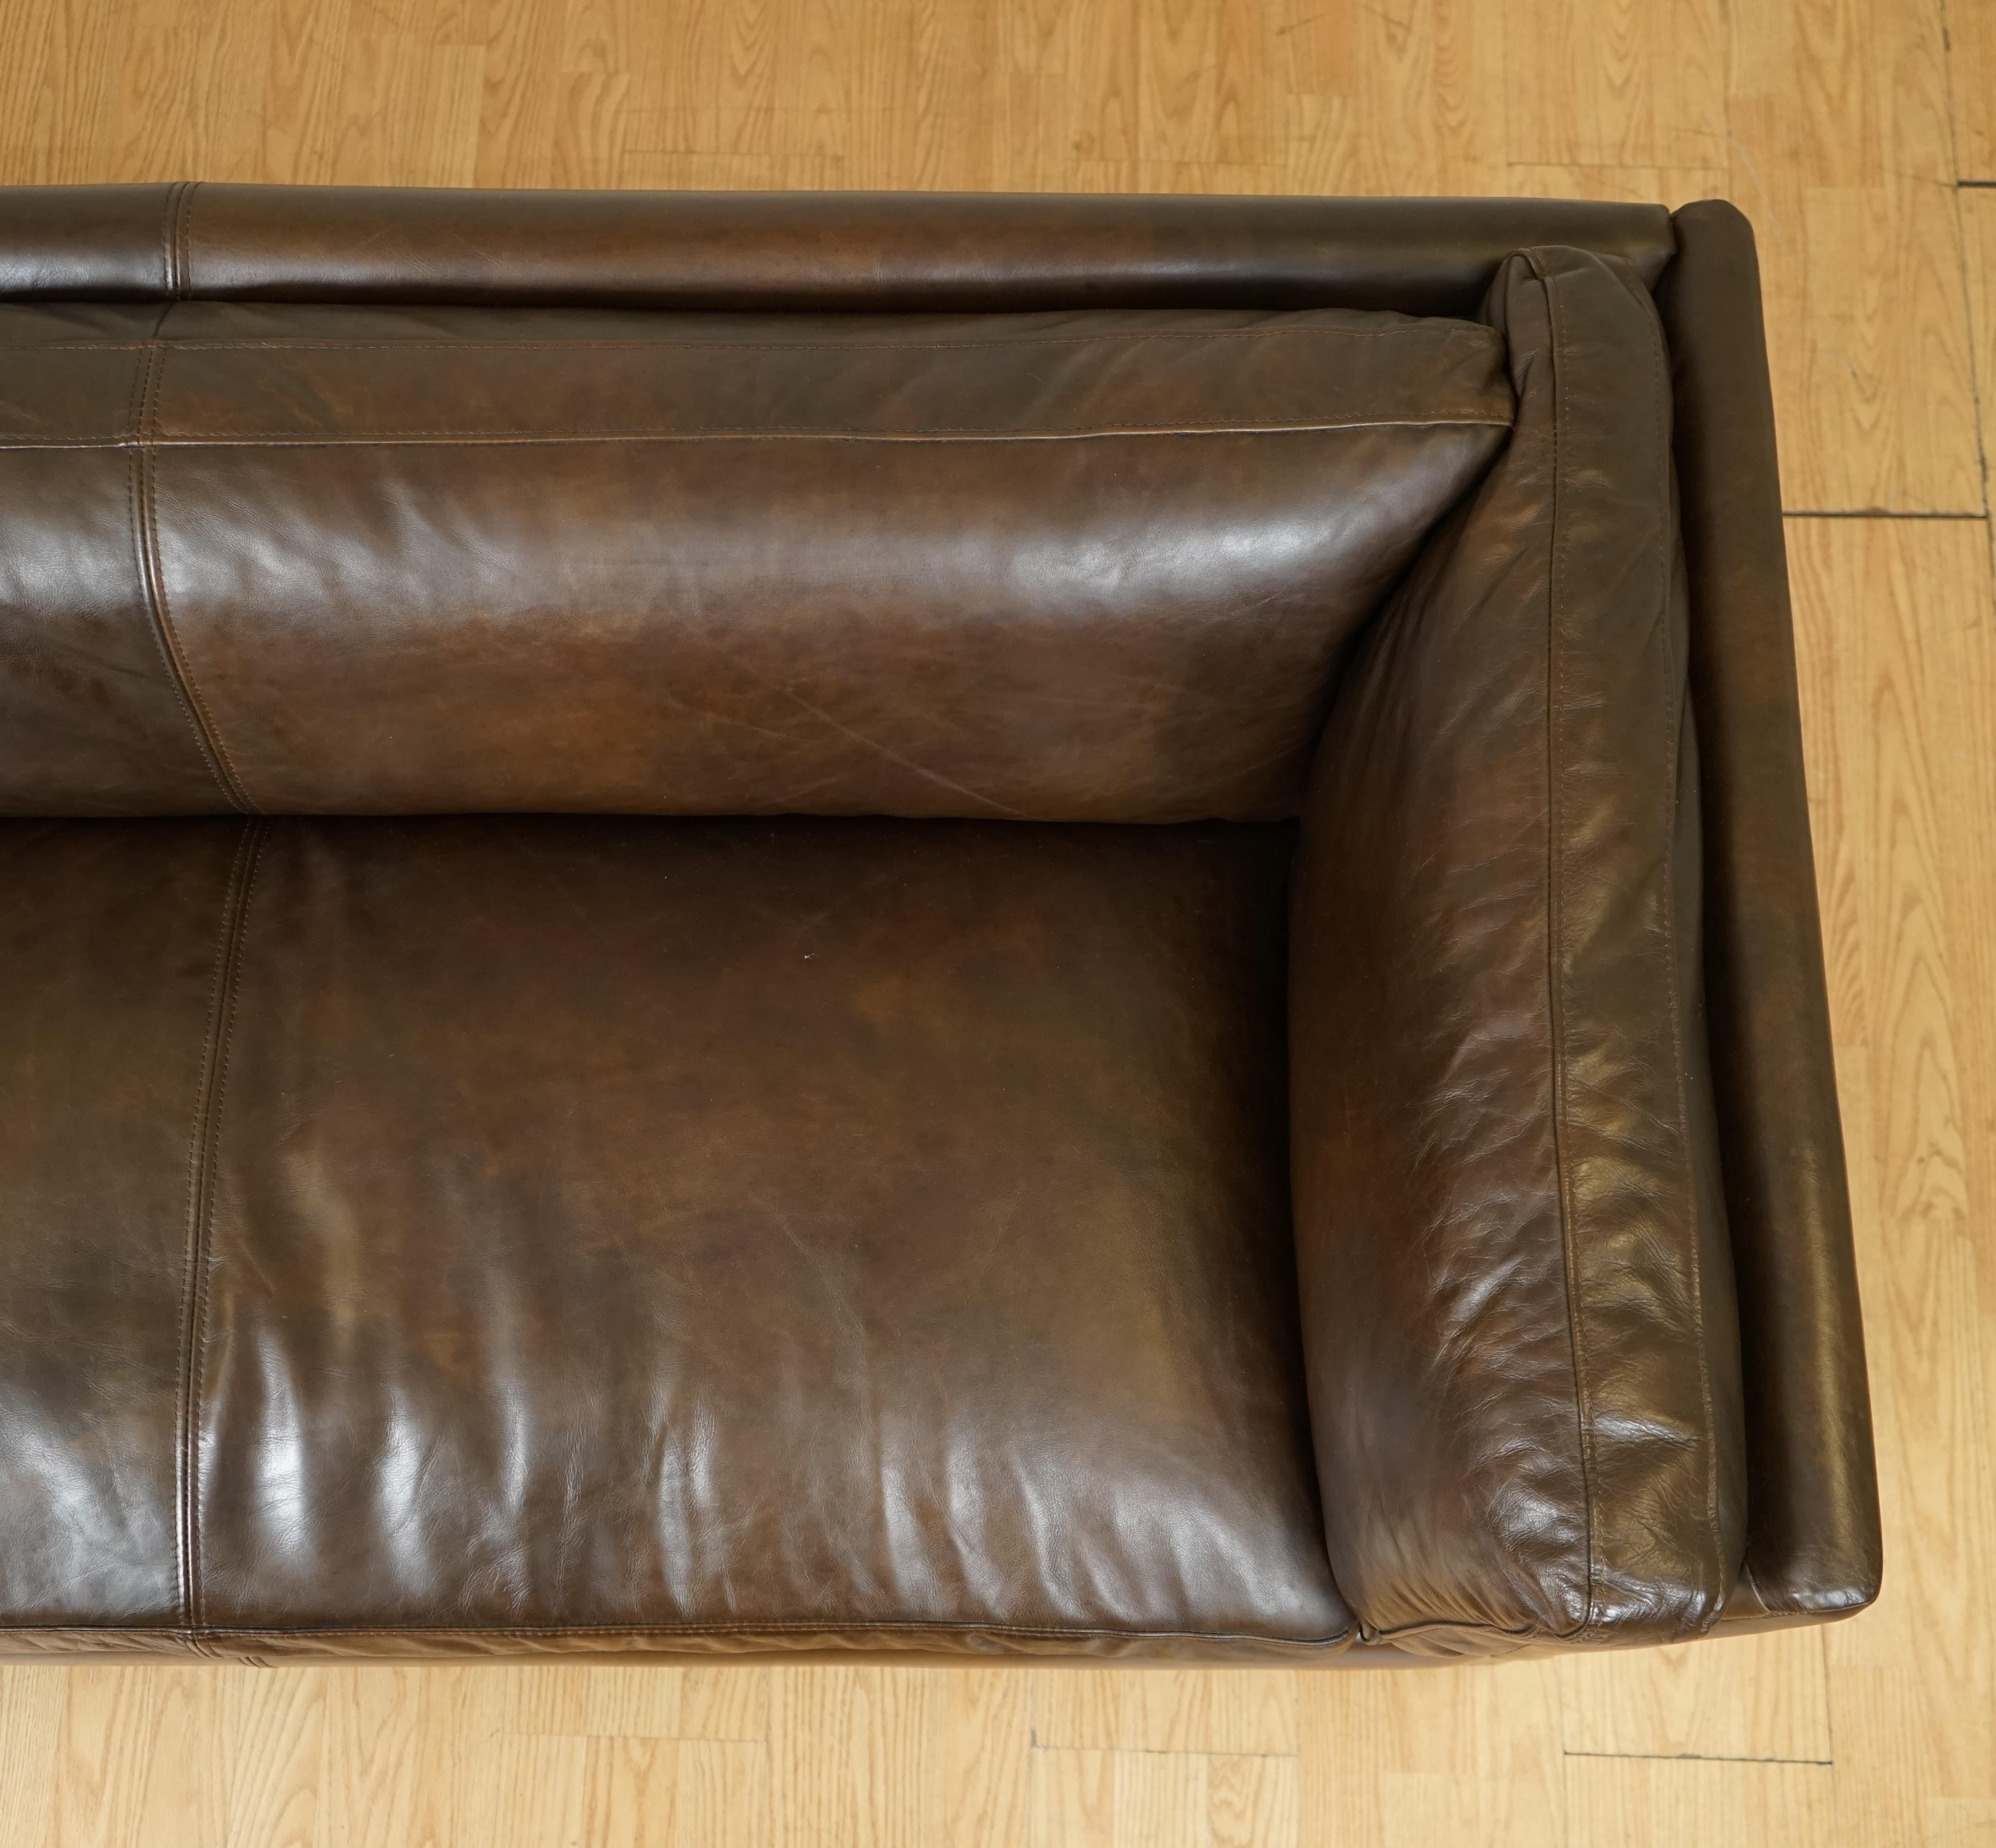 Hand-Crafted Brilliant Mint Condition Halo John Lewis Groucho Medium 2.5 Seater Leather Sofa